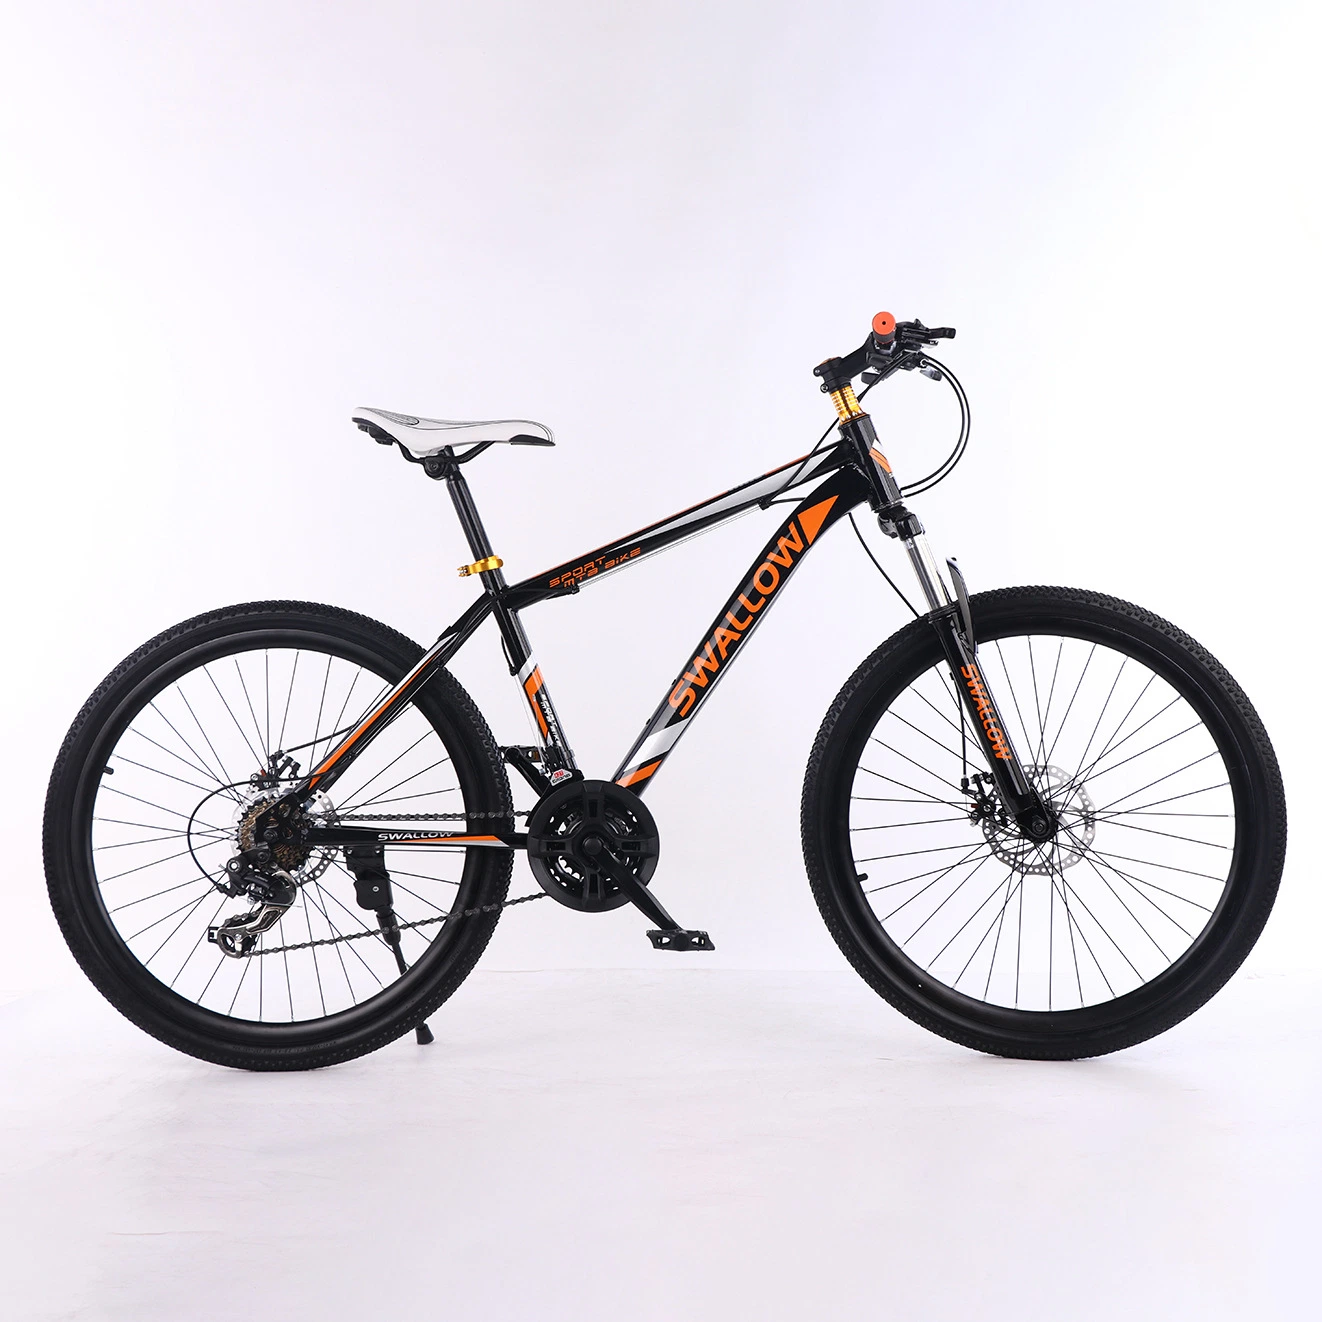 26" Size Suspension Fork, Steel Frame MTB Bikes, Mountain Bicycles China with 21 Speed, Alloy Rims.